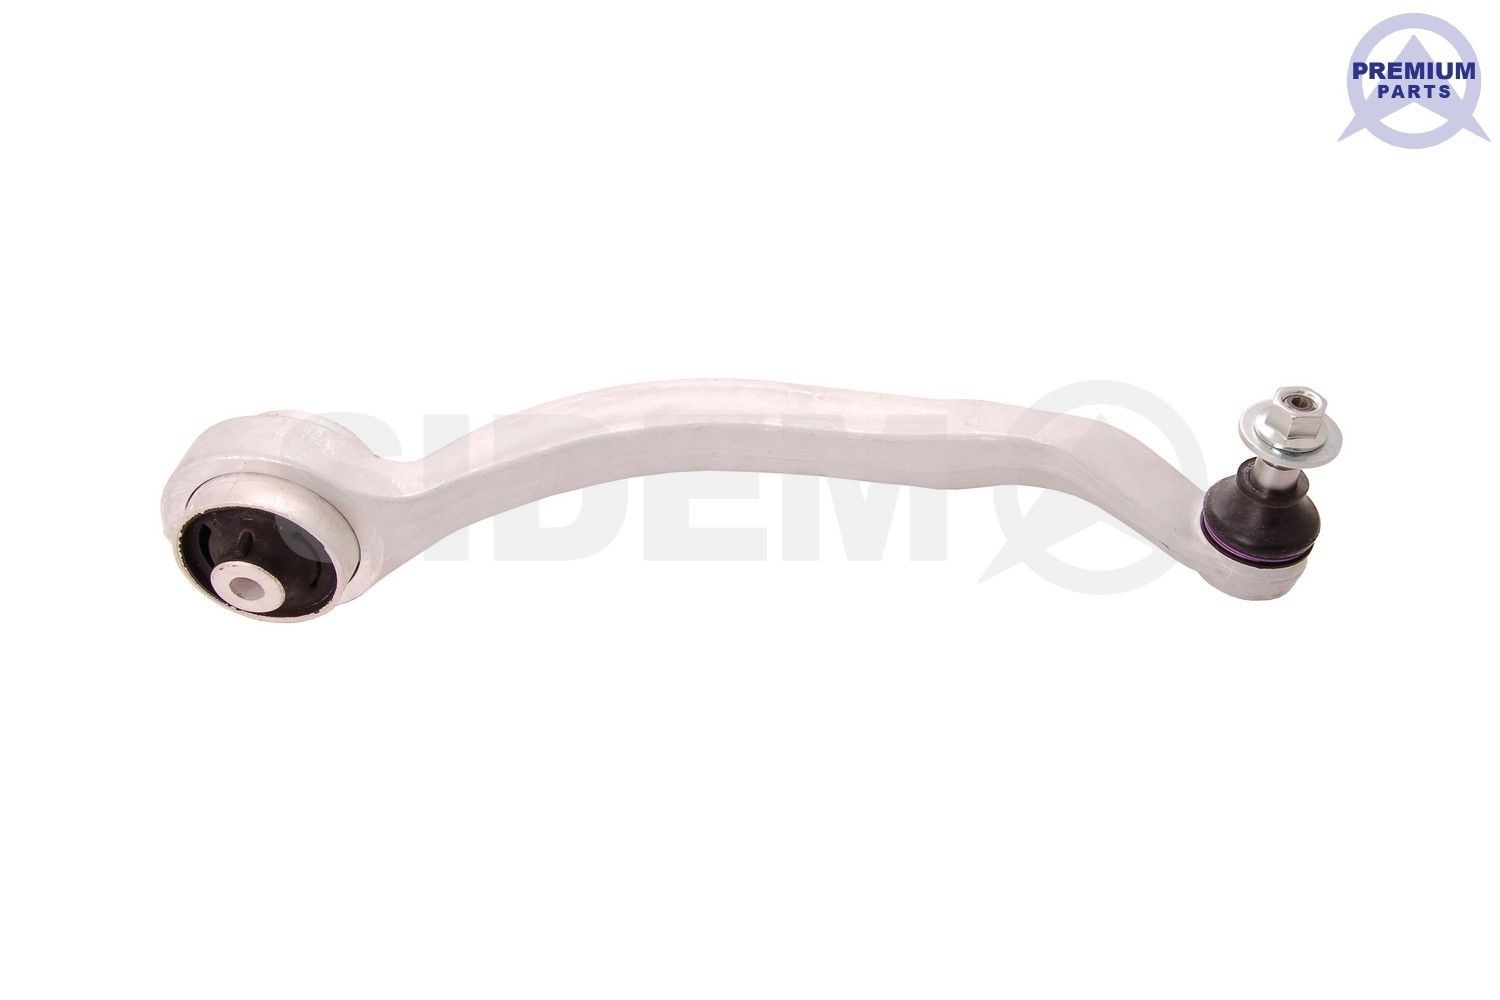 SIDEM 37073 Suspension arm Rear, Lower, Front Axle Right, Trailing Arm, Aluminium, Cone Size: 15,4 mm, Push Rod